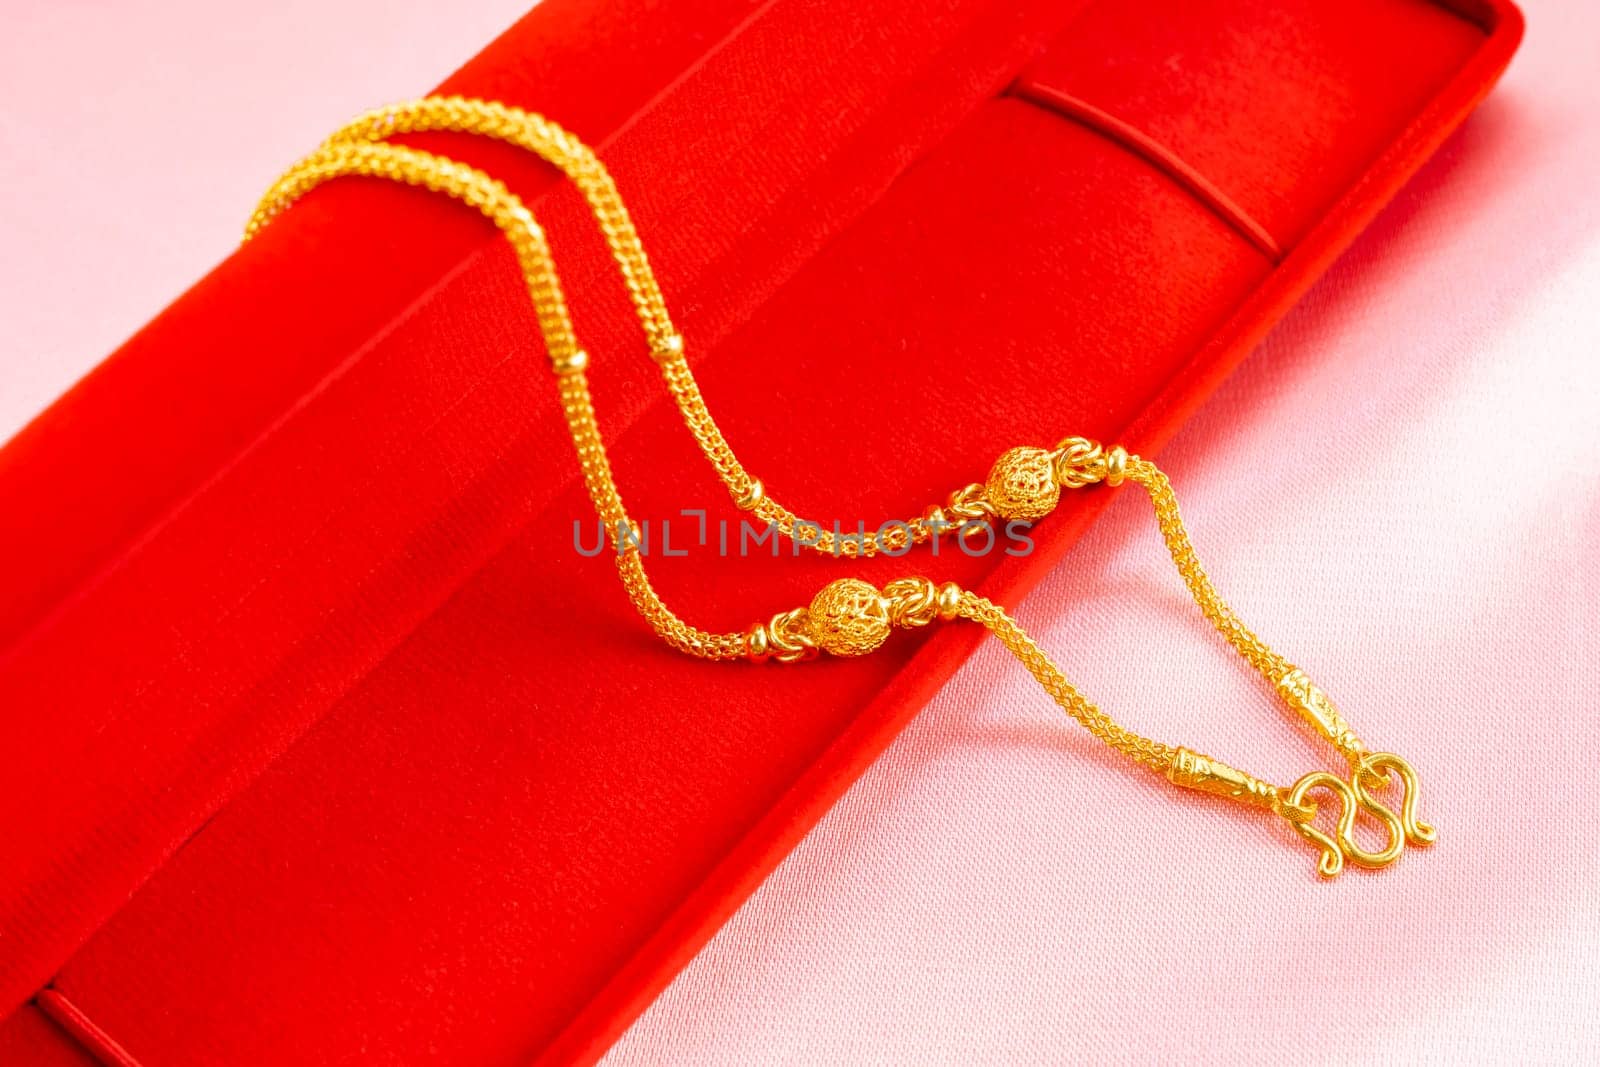 Gold necklace on a red velvet box on a pink color fabric background.